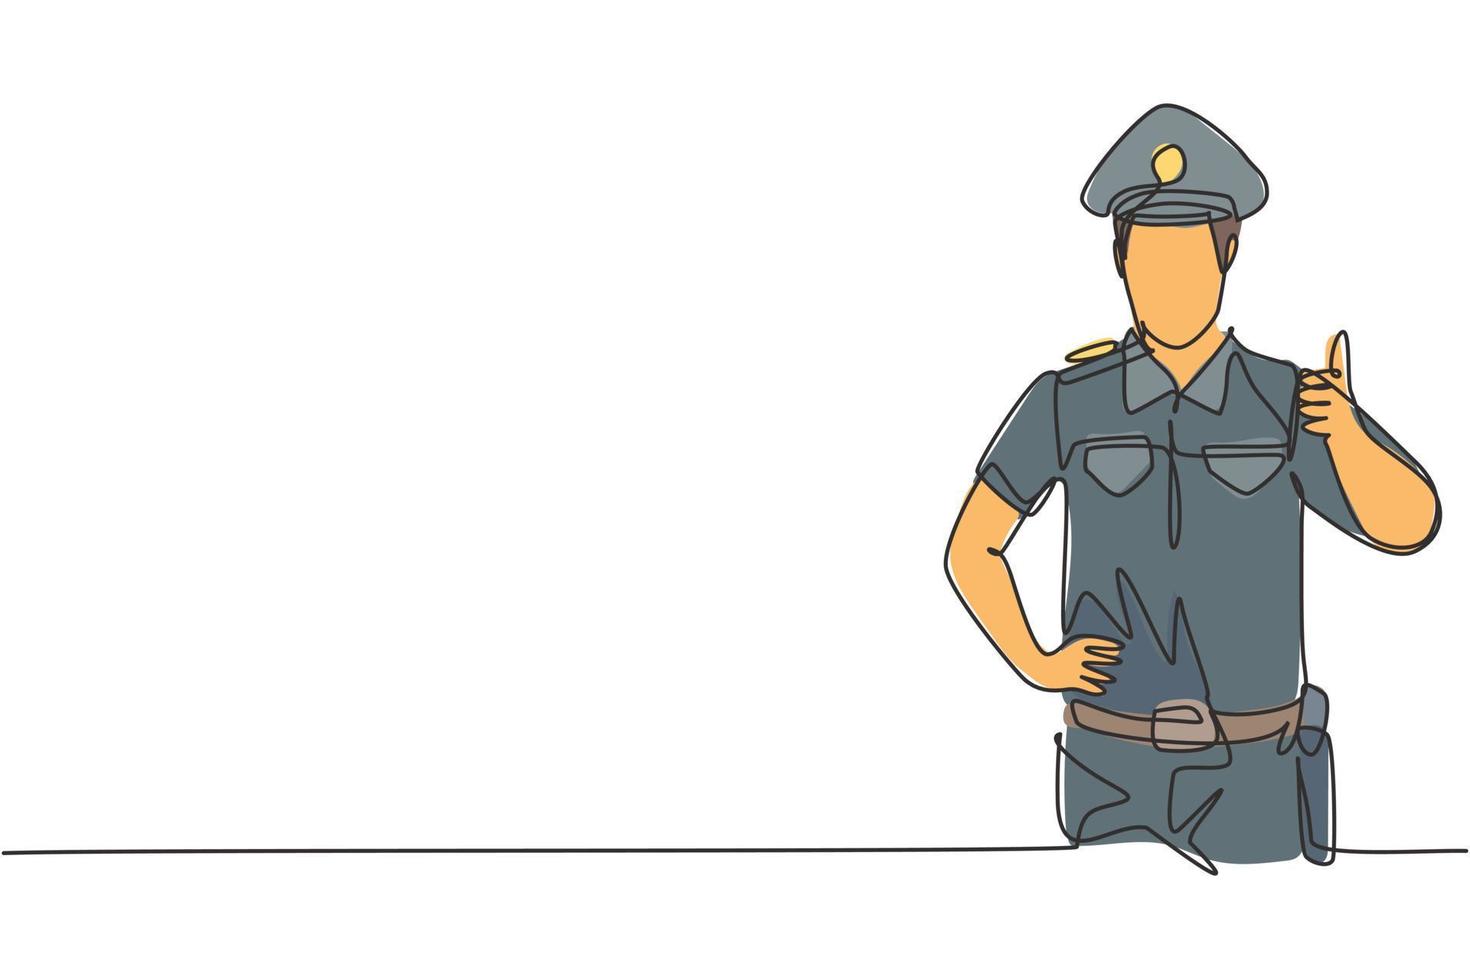 Continuous one line drawing the policeman with a thumbs-up gesture and in full uniform is ready to enforce traffic discipline on the highway. Single line draw design vector graphic illustration.